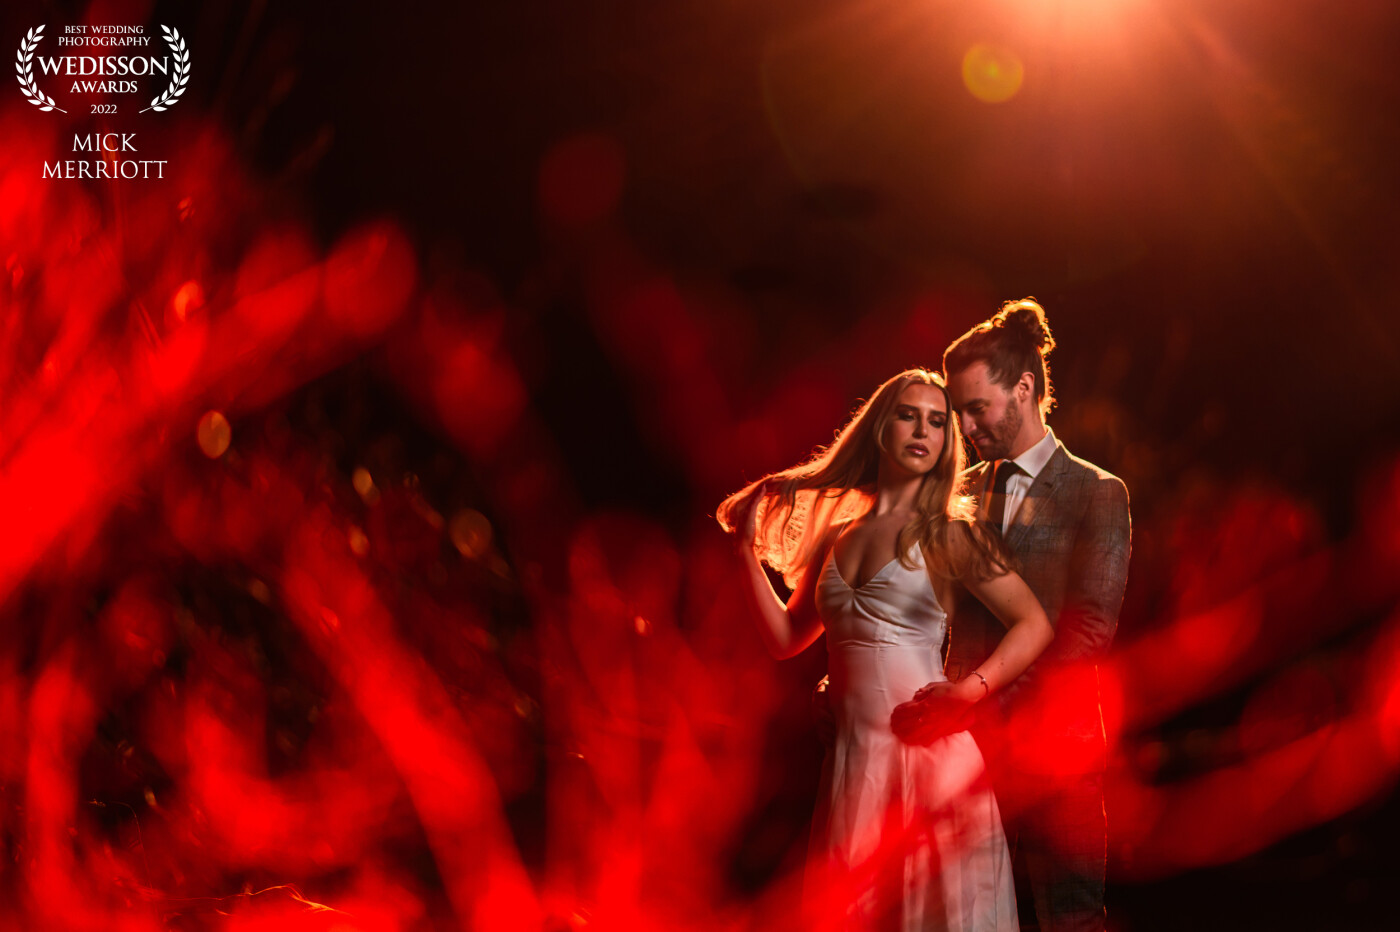 This was taken on a wedding workshop with the fantastic Neil Redfern at Eaves Hall.<br />
<br />
The image was made in almost pitch black conditions outdoors utilising 3 ocf lights to light the subjects, create the sunset and light the bush in the foreground to create the bokeh with a red gel.